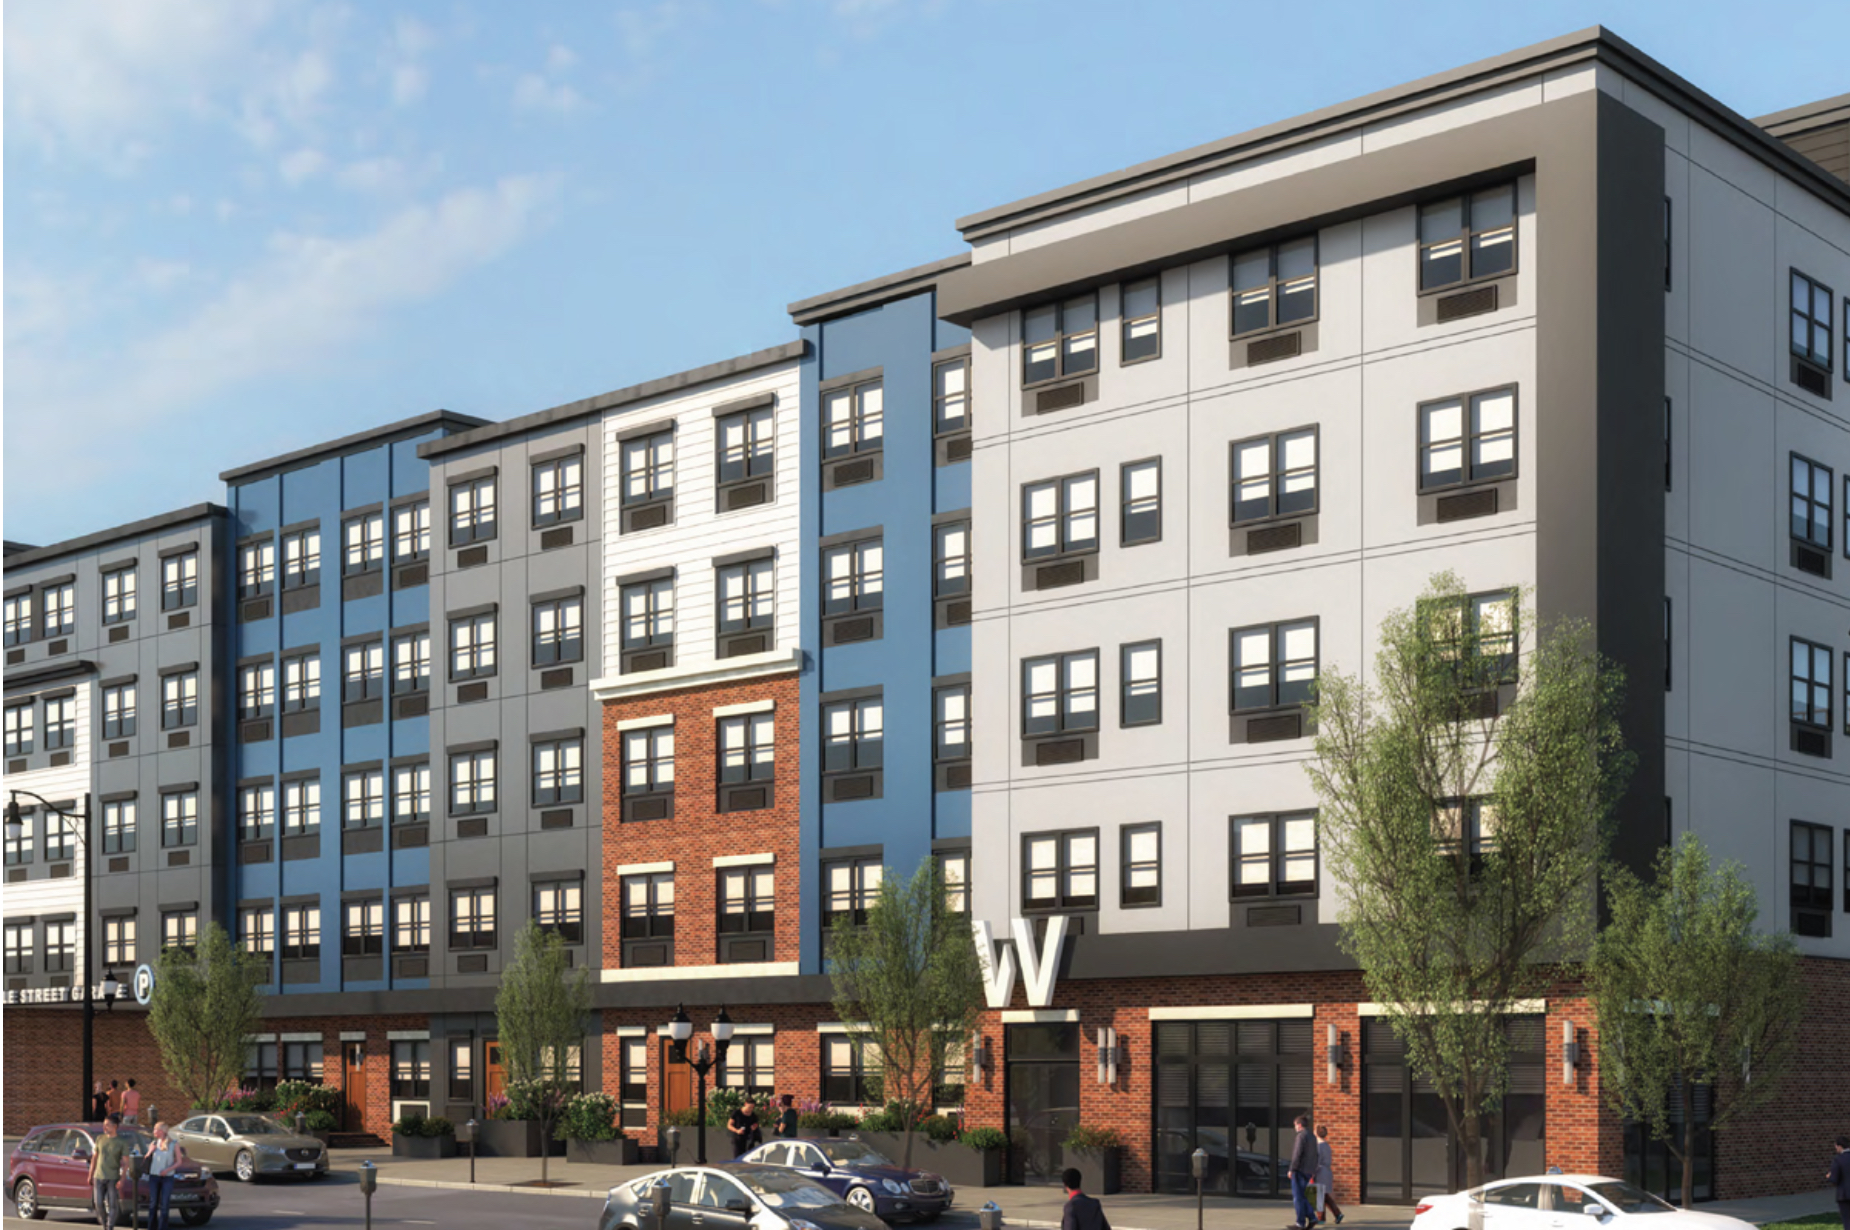 Rendering of Walnut View at Cityplace. Credit: City Center Allentown.